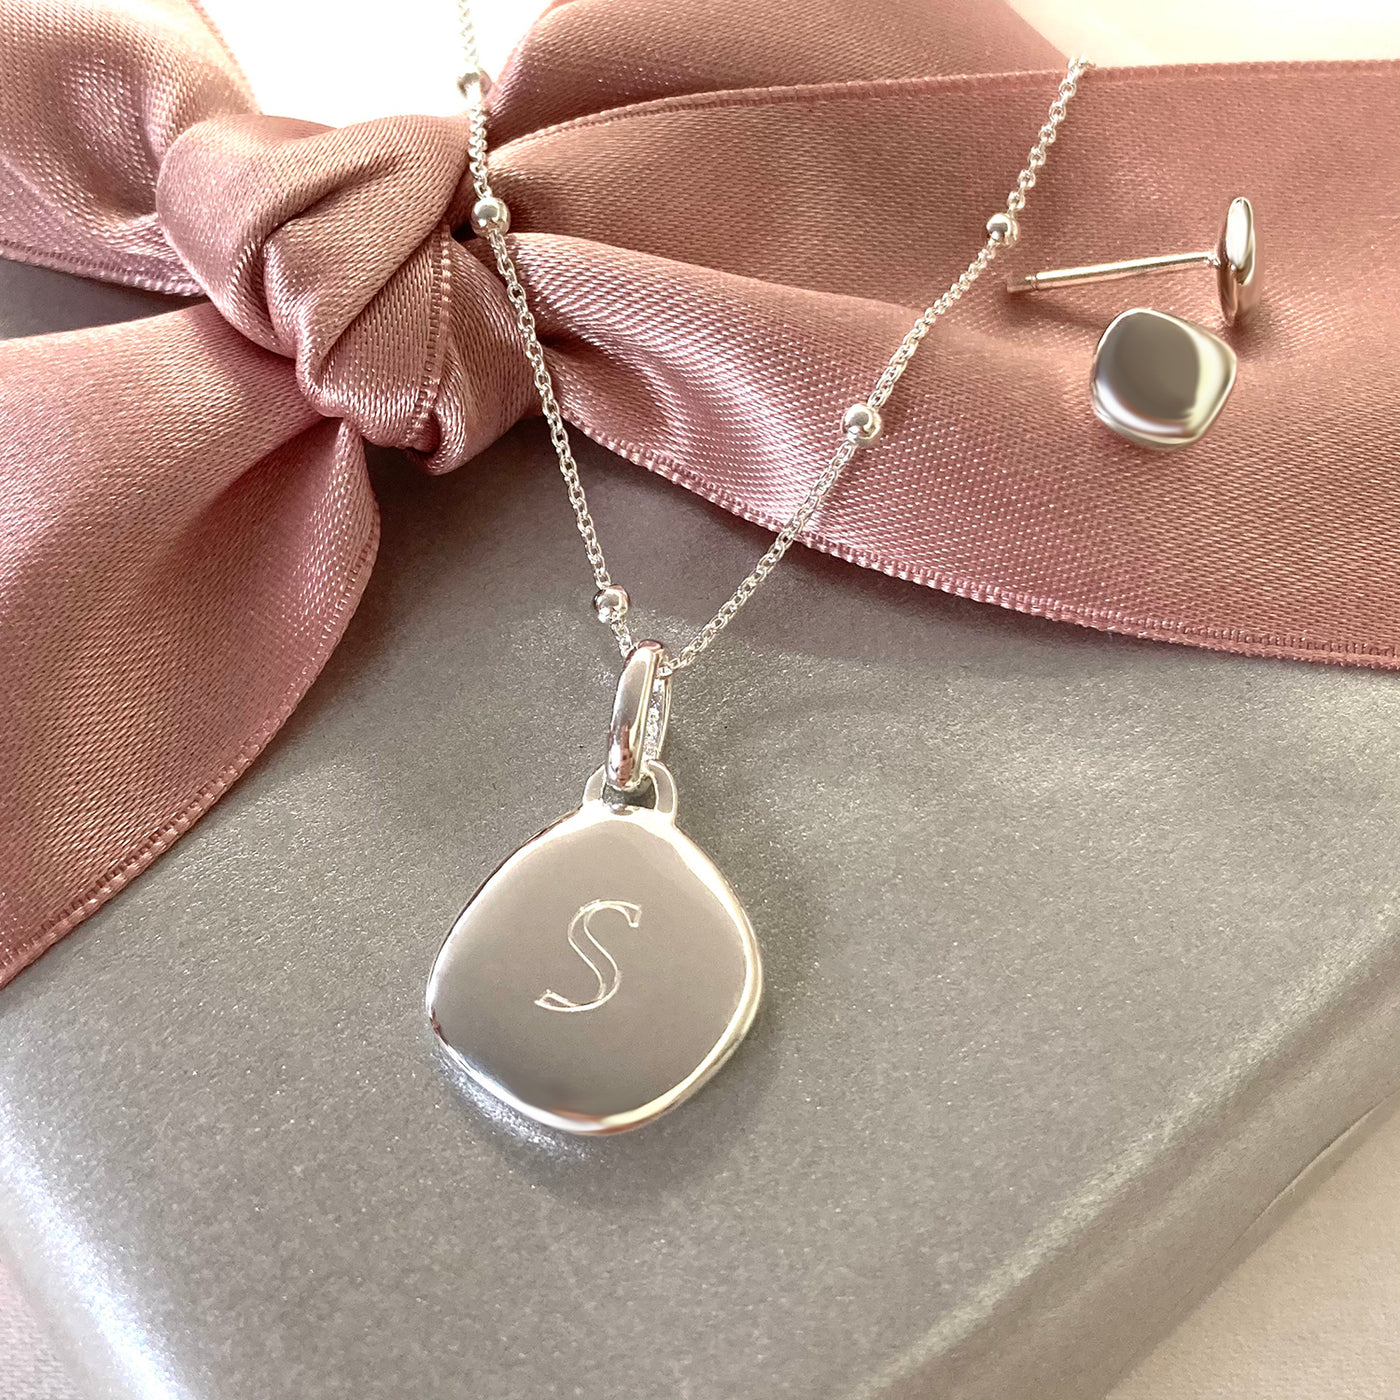 Lena Pebble Necklace with Beaded Chain, Sterling Silver